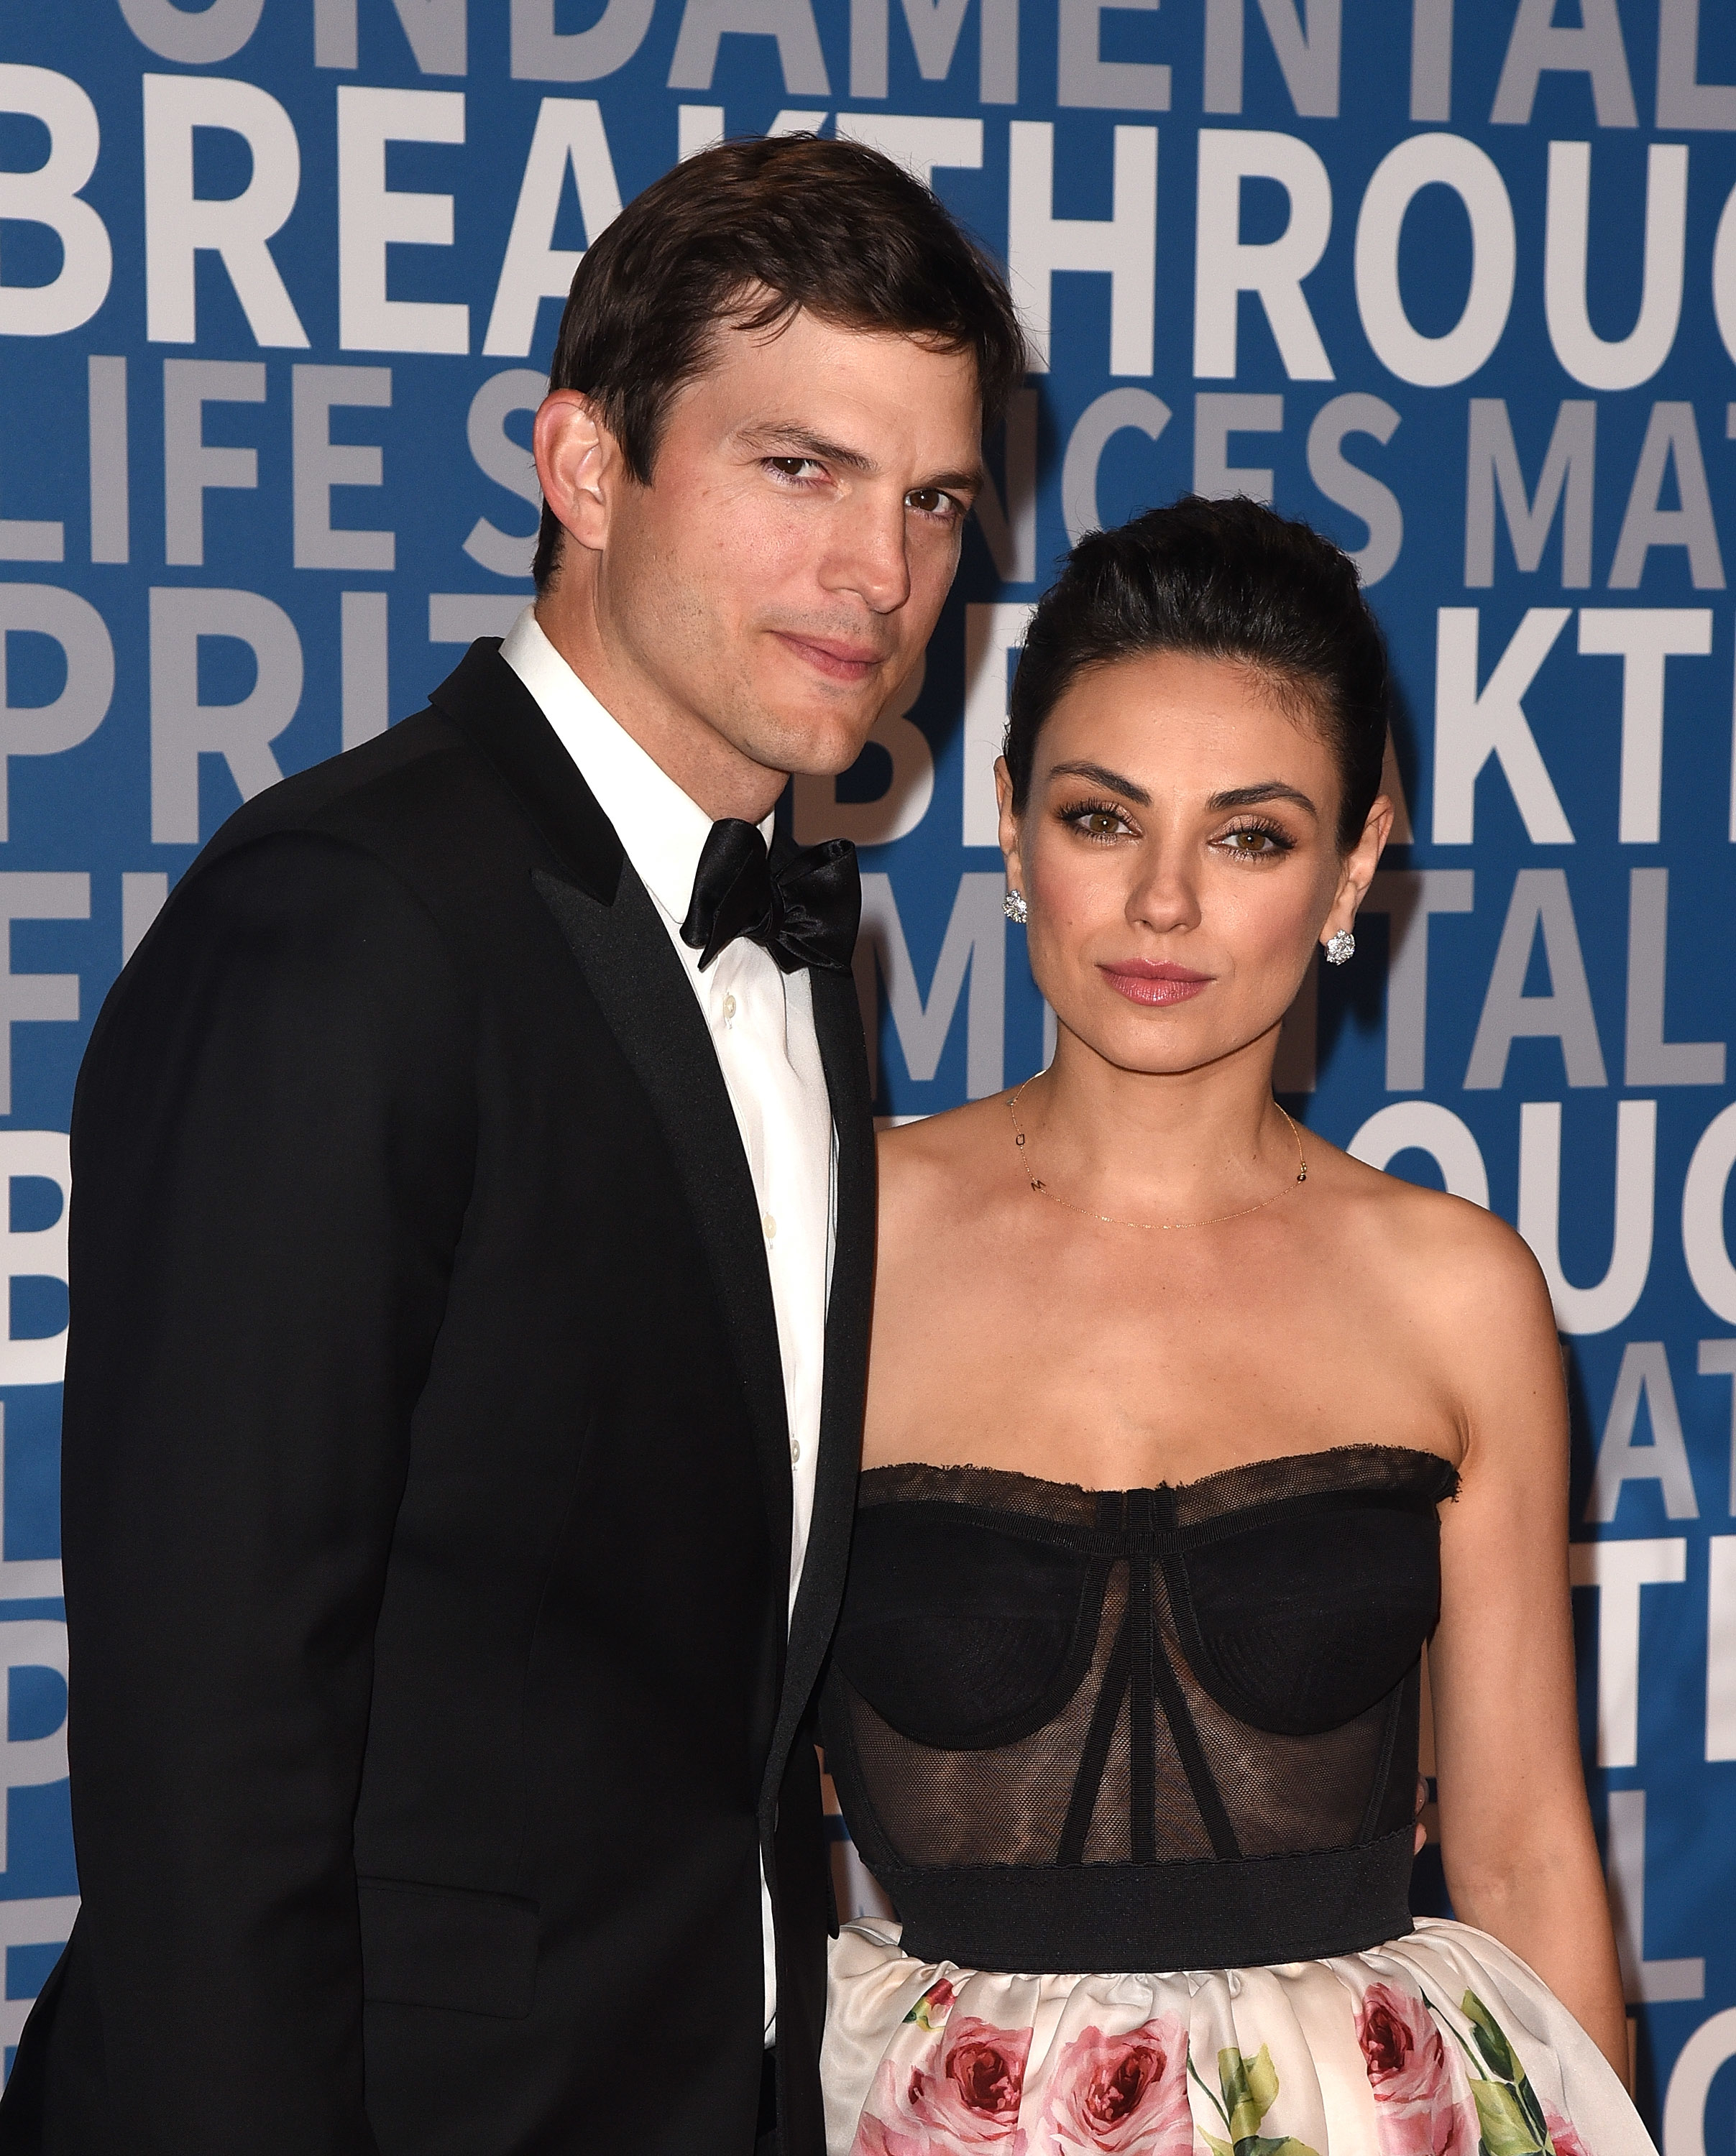 Close-up of Ashton and Mila at a media event